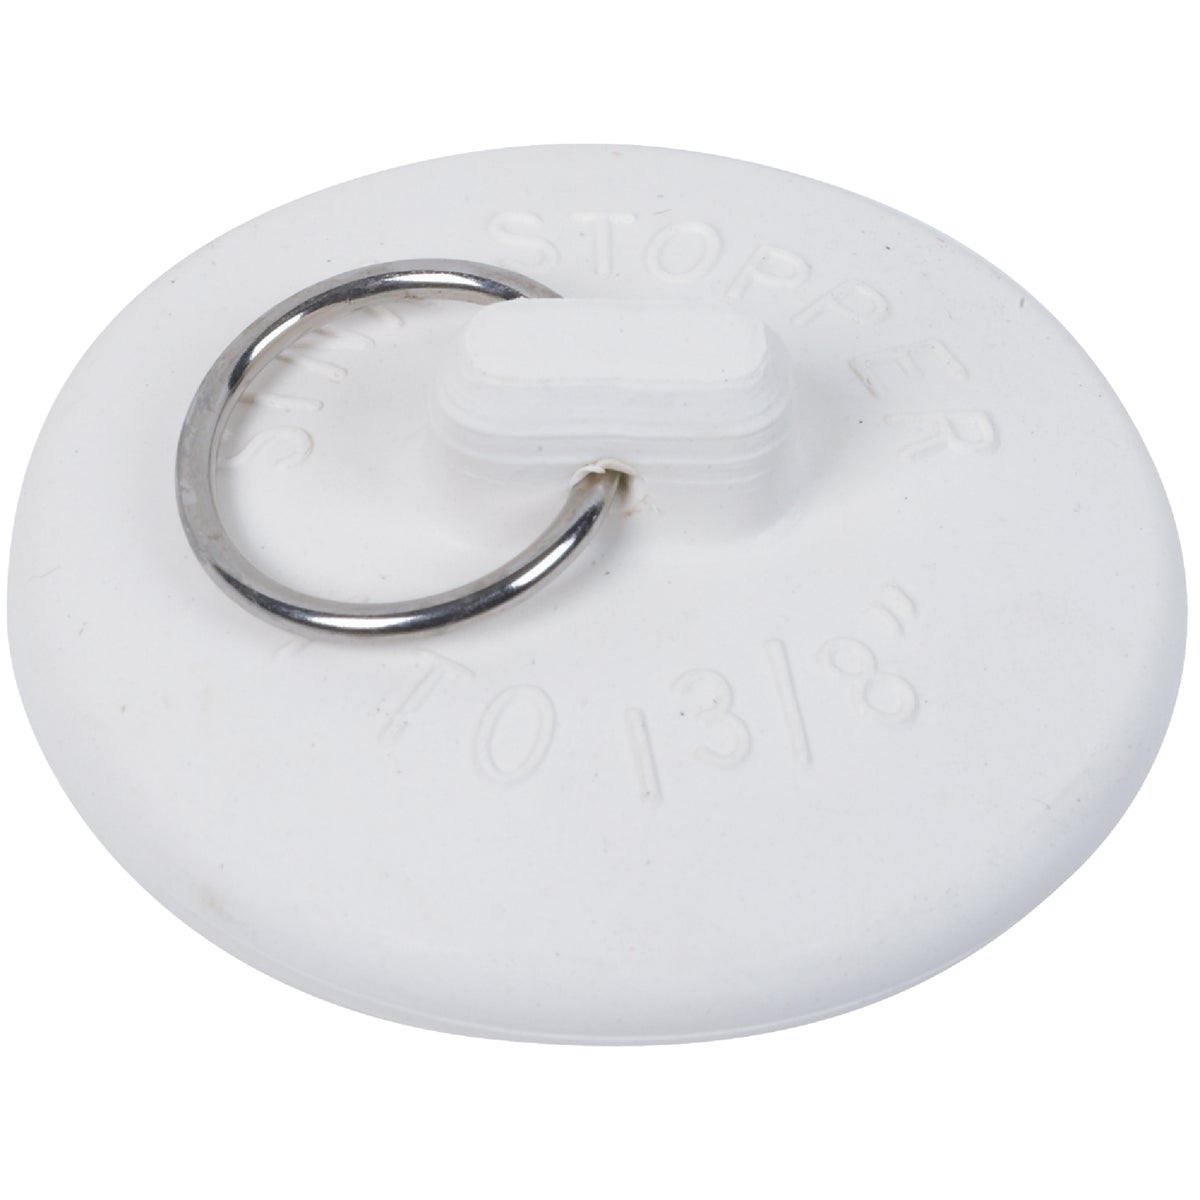 Item 415036, Fits-all white rubber lavatory and basin stopper with nickel-plated brass 